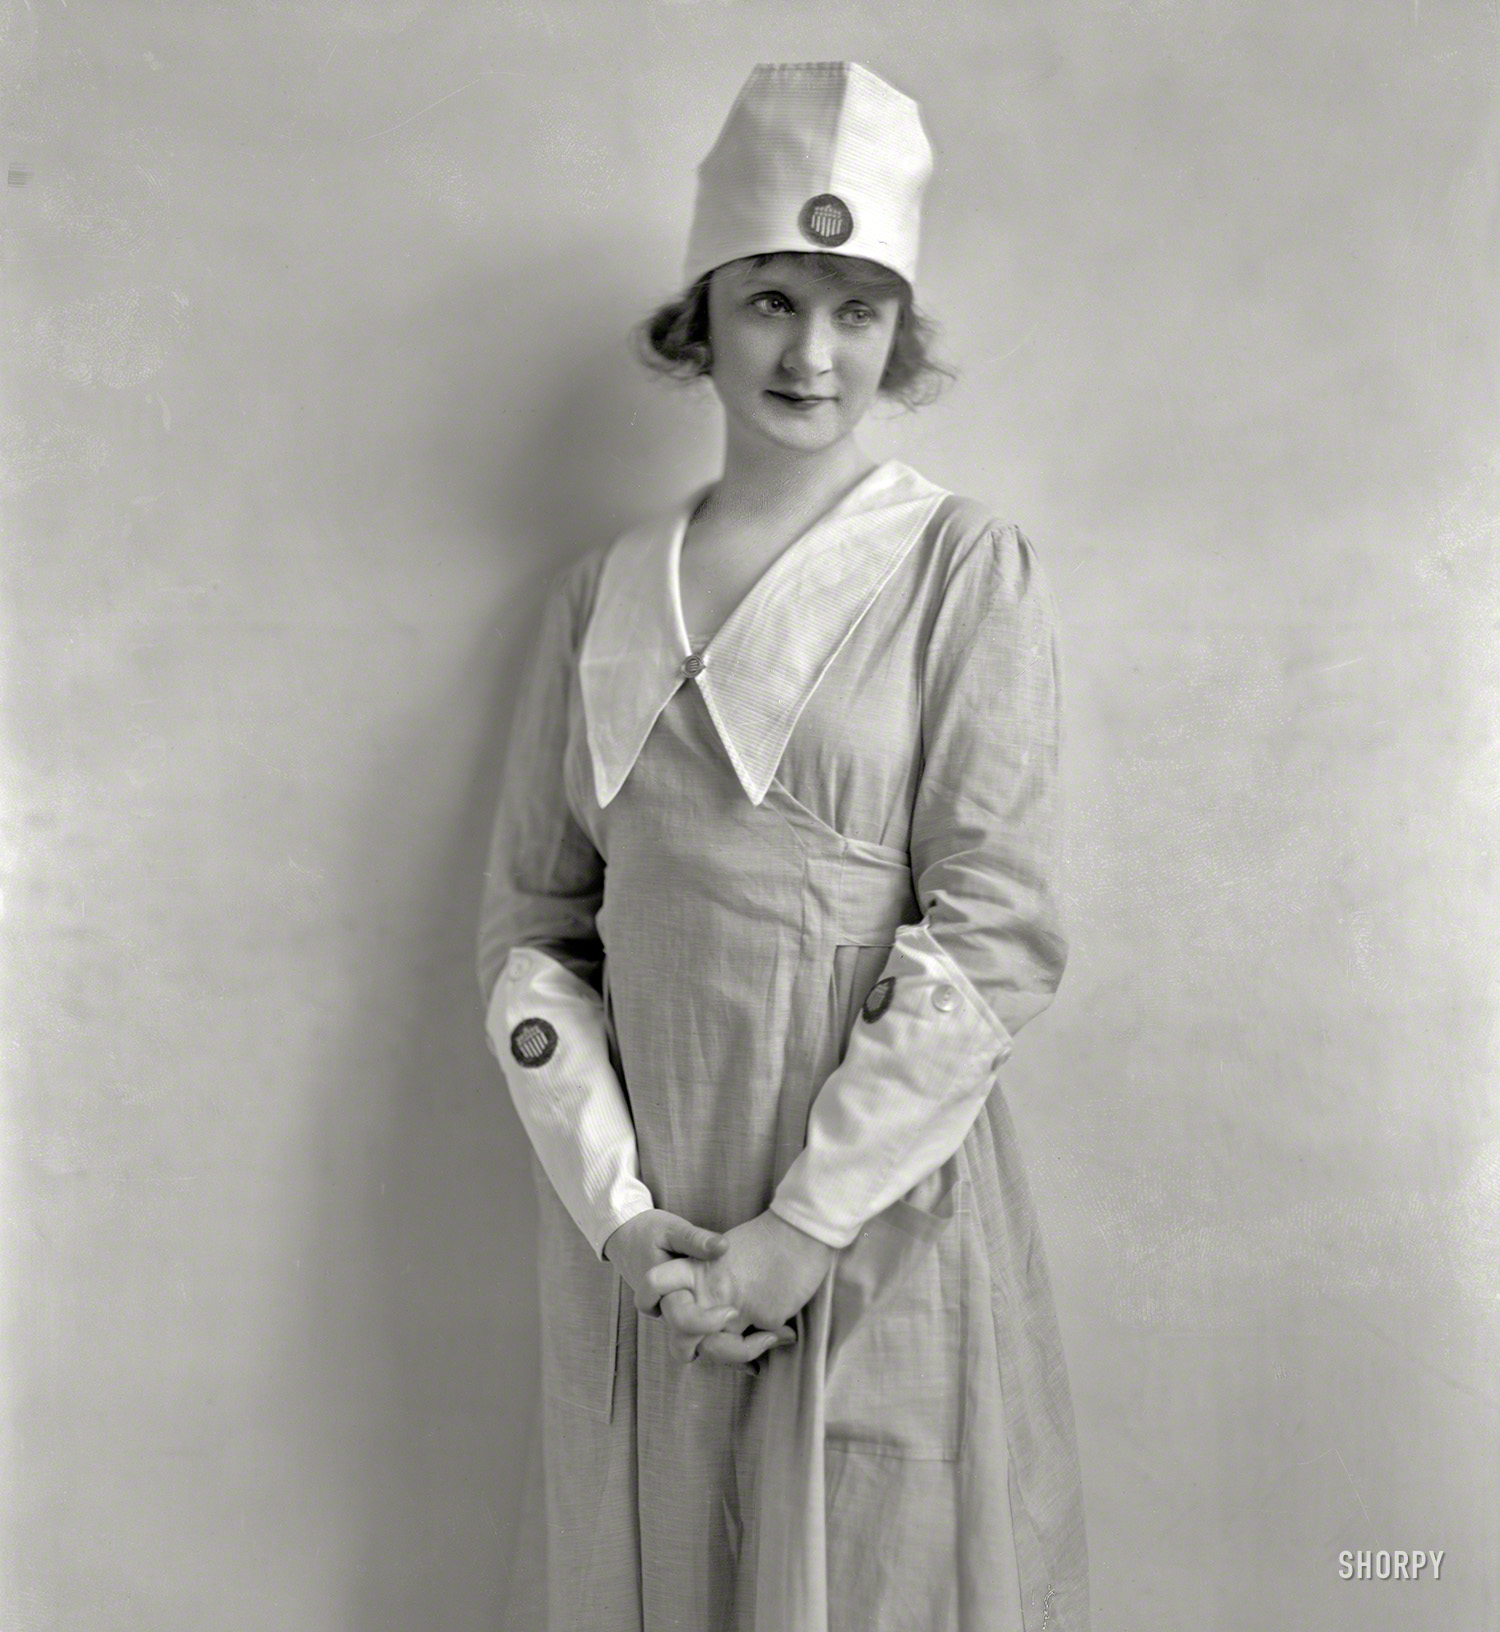 Washington, D.C., native Billie Burke in her hometown circa 1918. Some 20 years later she would attain pop-culture immortality as Glinda the Good Witch in "The Wizard of Oz." Harris & Ewing Collection glass negative. View full size.